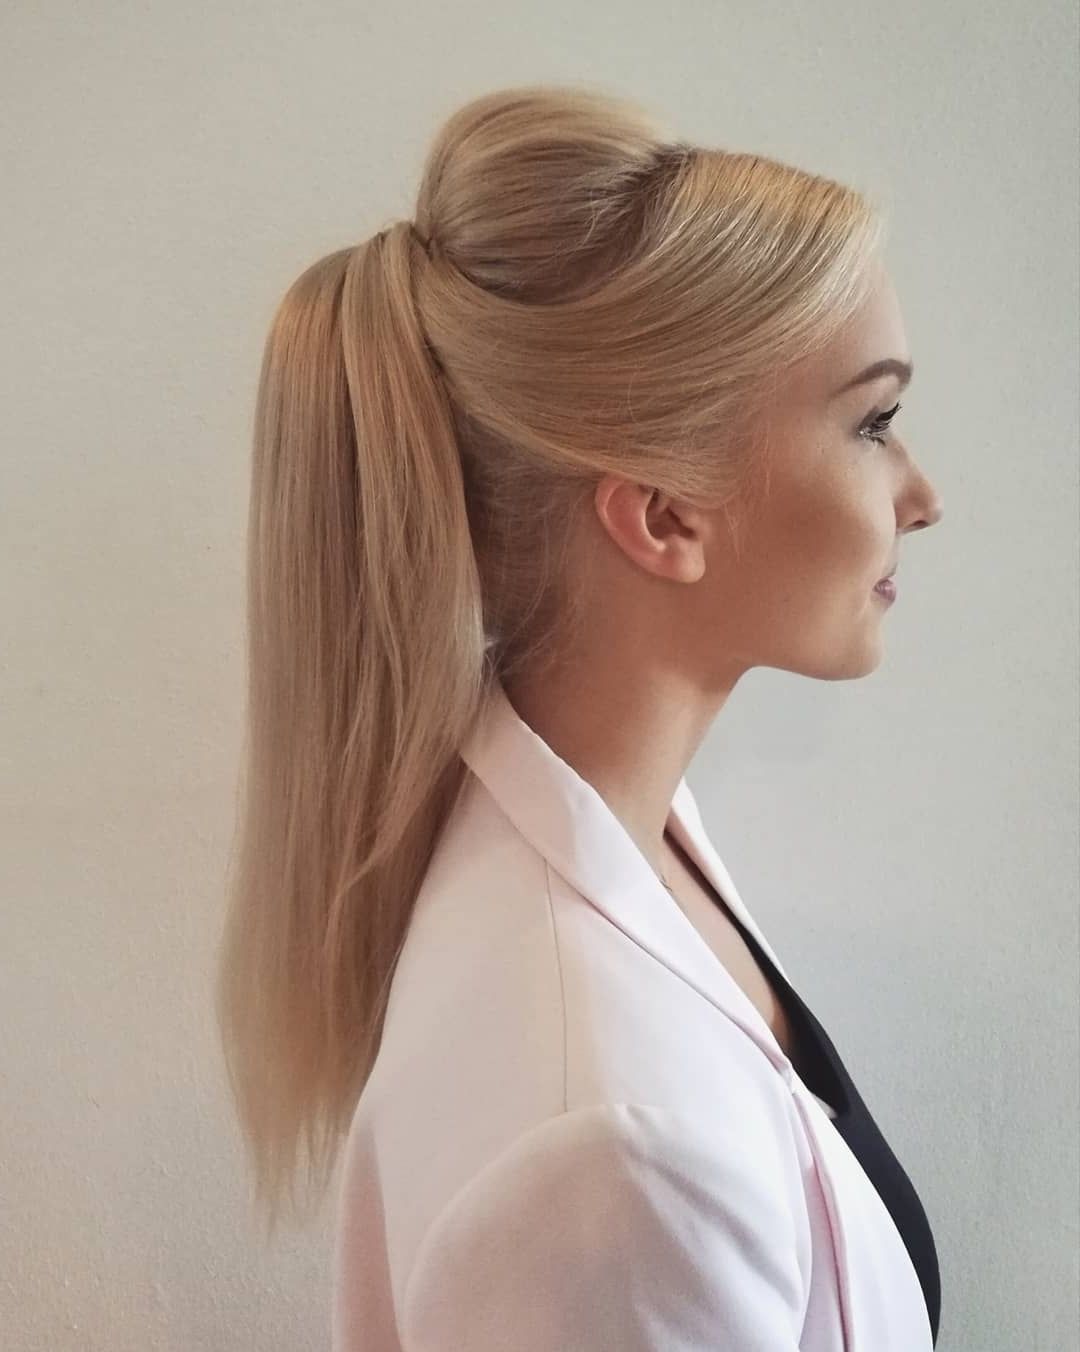 Newest Blonde Flirty Teased Ponytail Hairstyles In 10 Creative Ponytail Hairstyles For Long Hair, Summer Hairstyle (View 12 of 20)